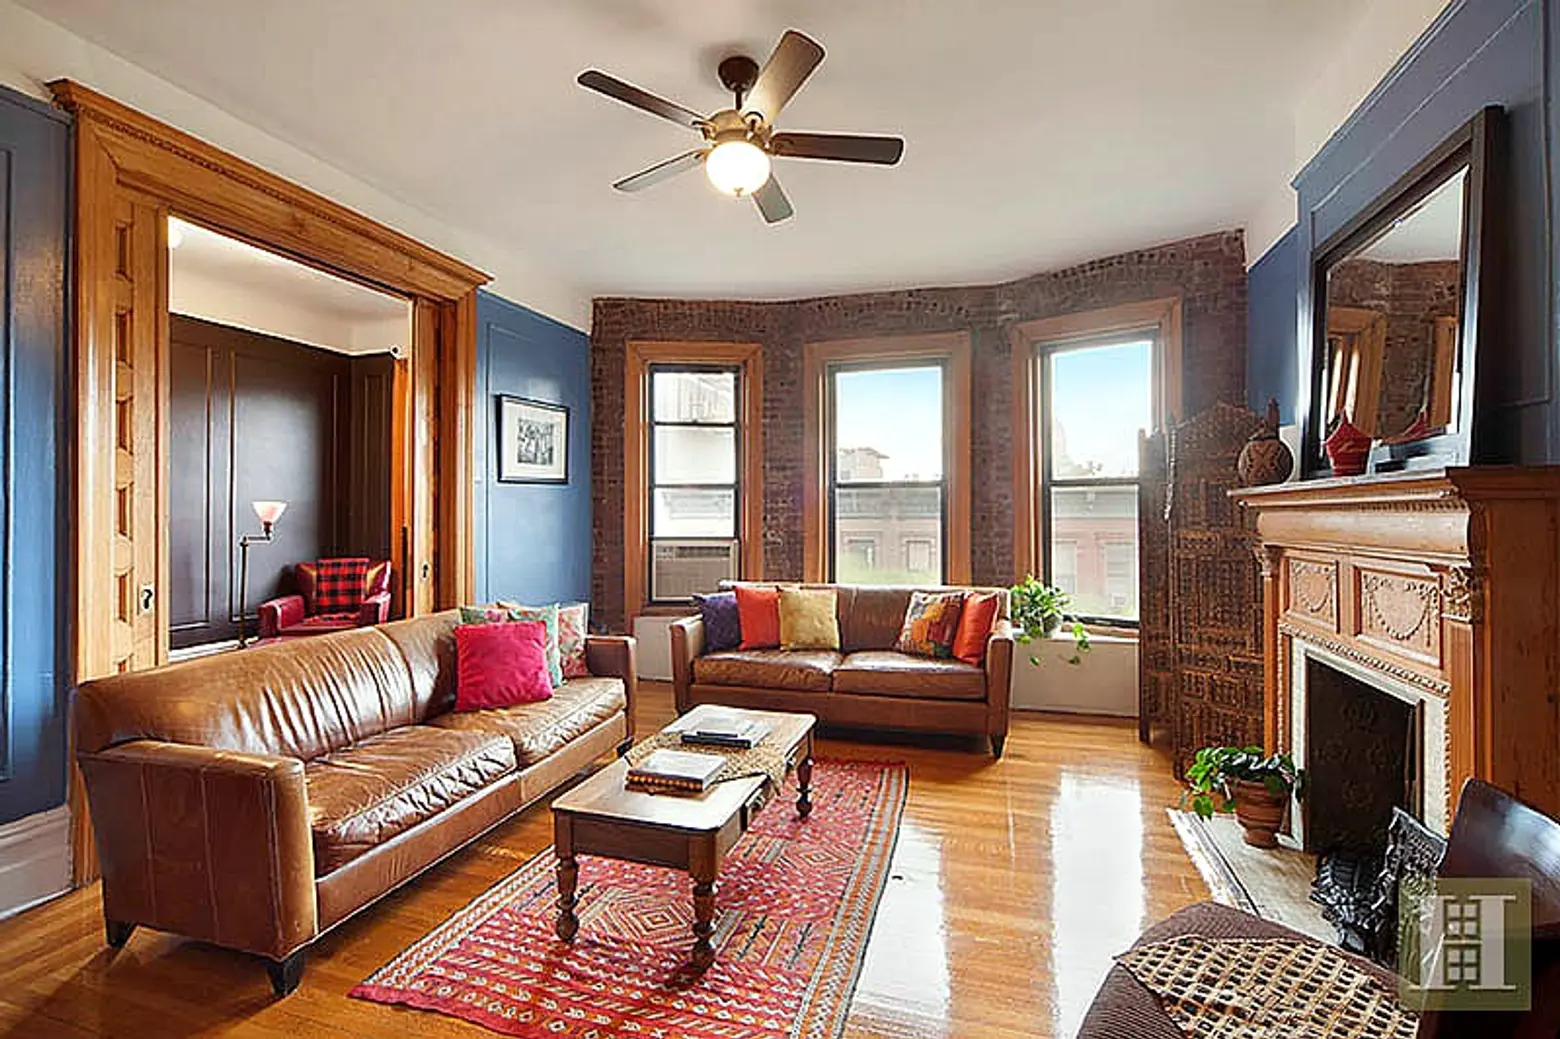 Charming Apartment in One of Harlem’s Oldest Co-ops Asks $1.1M